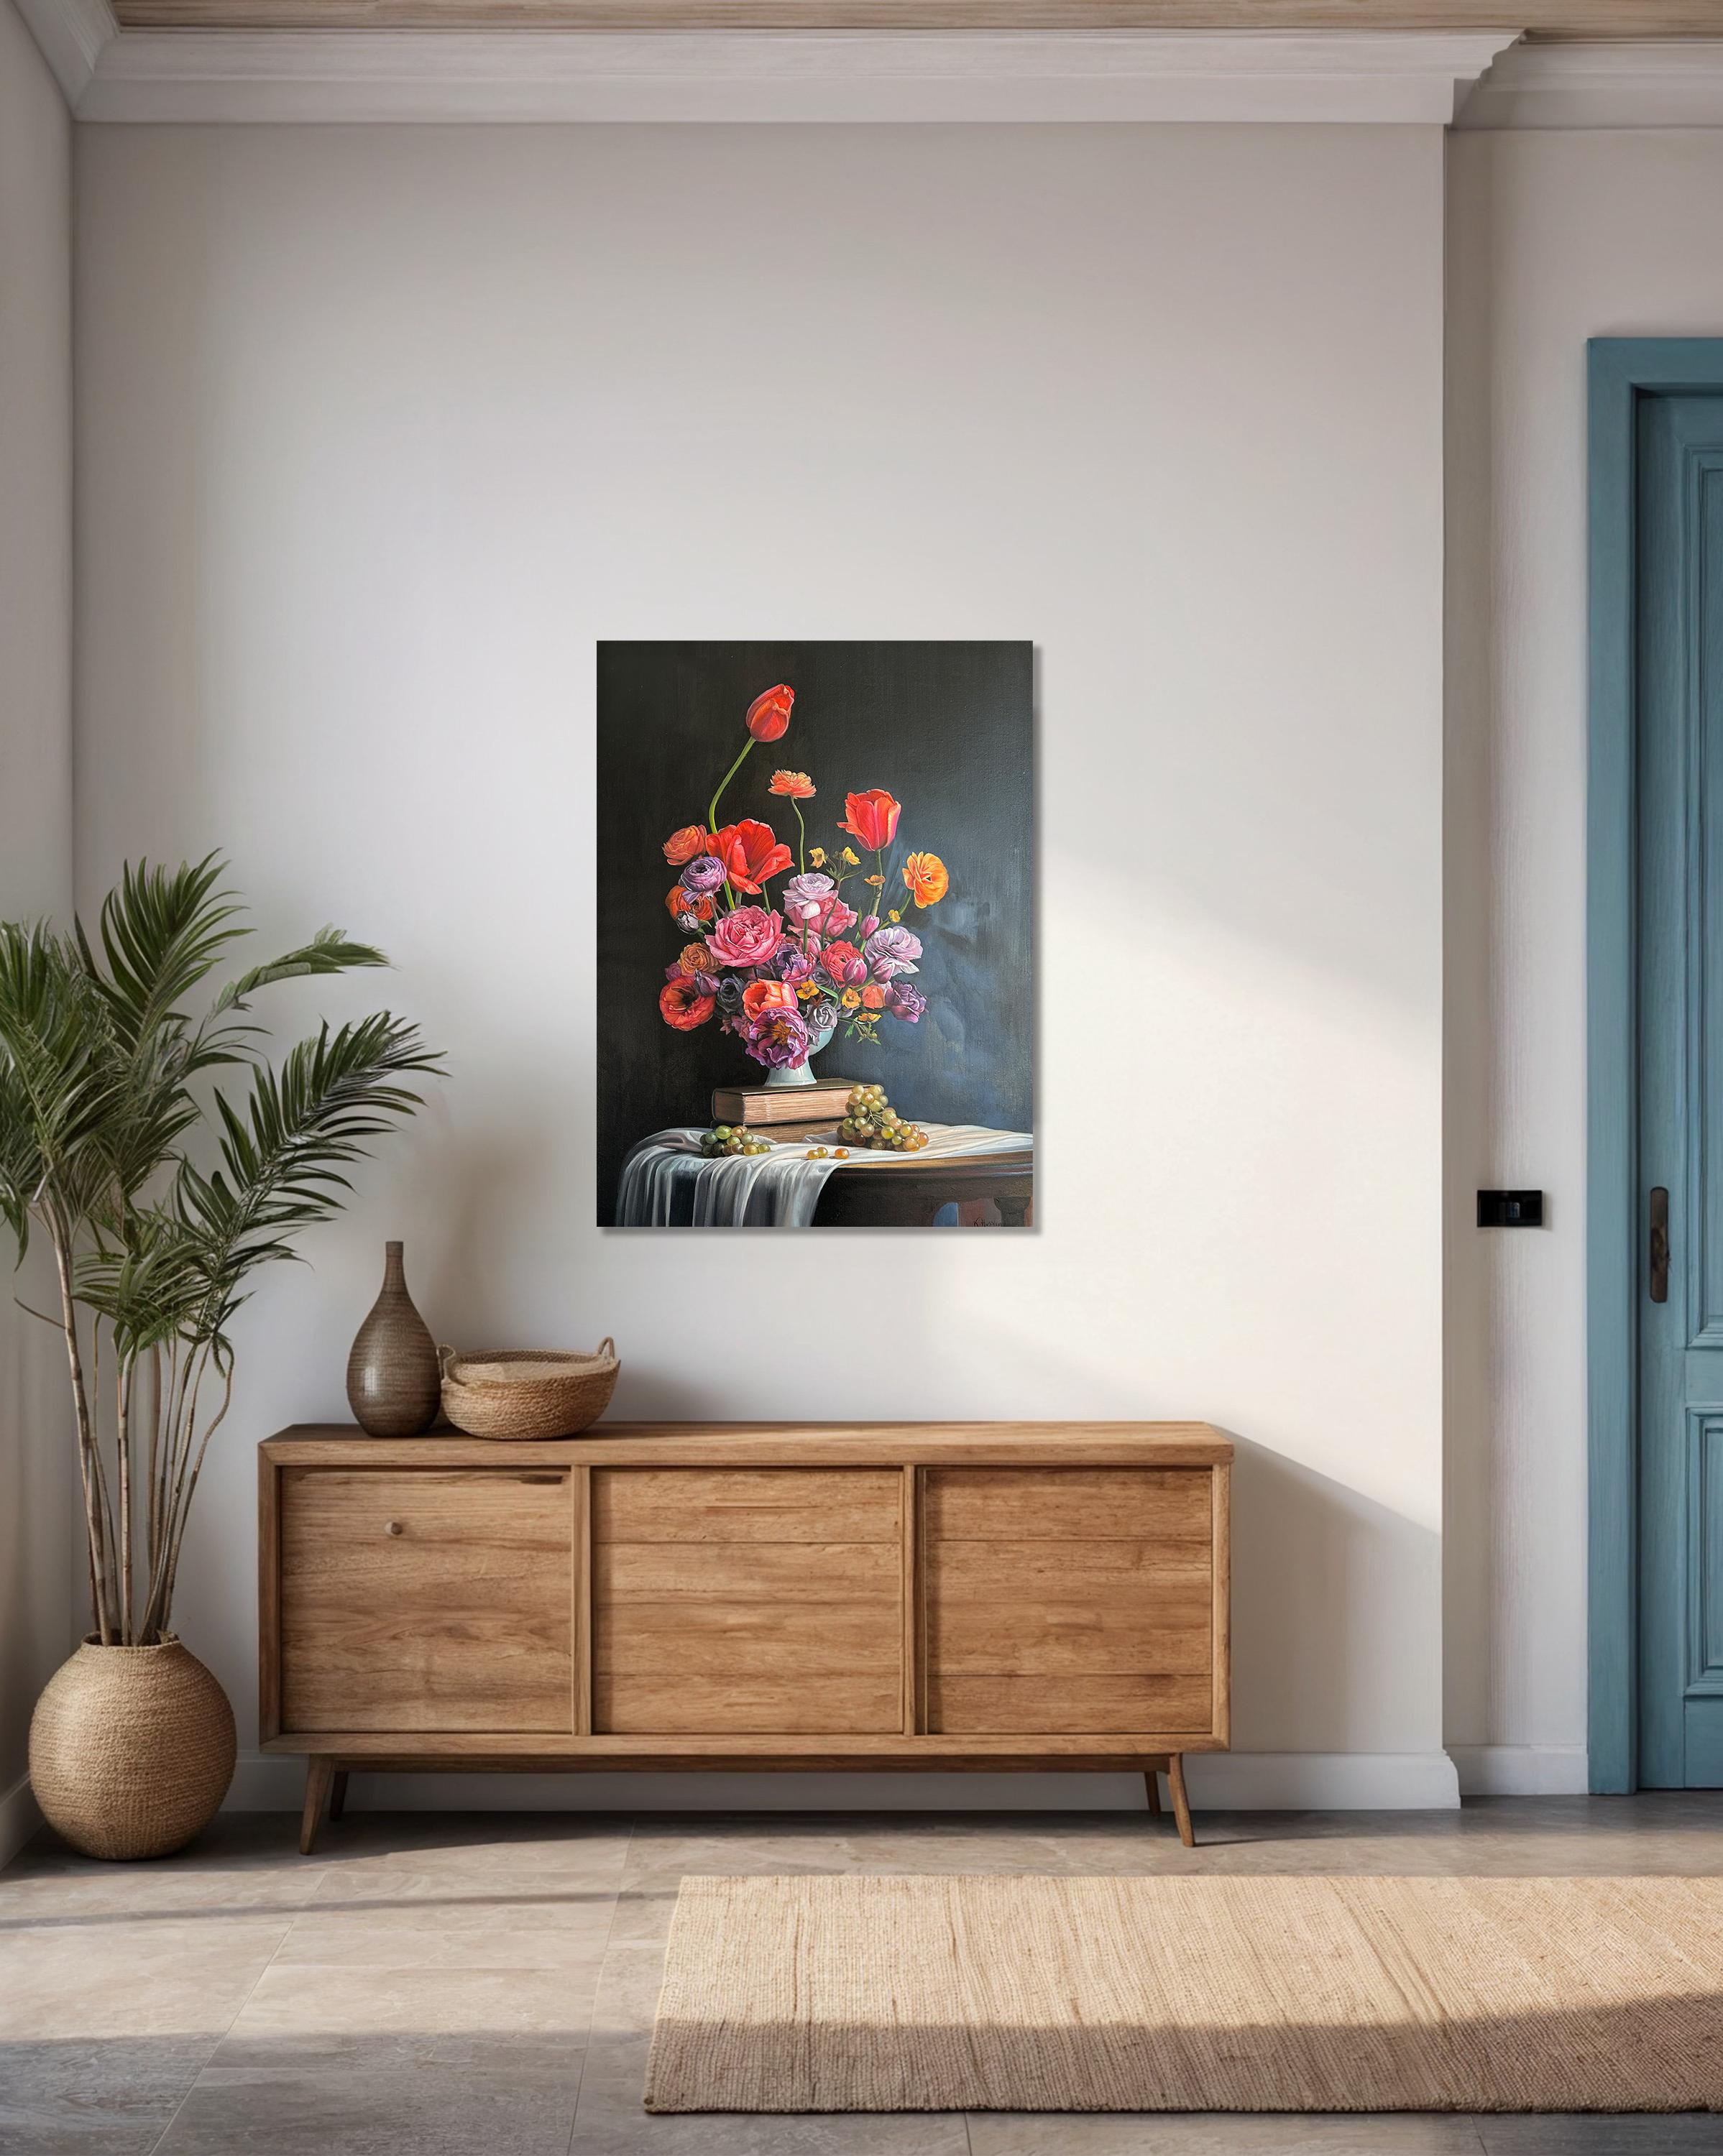 This is a beautiful oil painting of an array of flowers in a vase in front of a dark background.
Reminding us of old master paintings, this is a brand new painting full elegance and timeless elegance.
The botanical paintings by Katharina Husslein